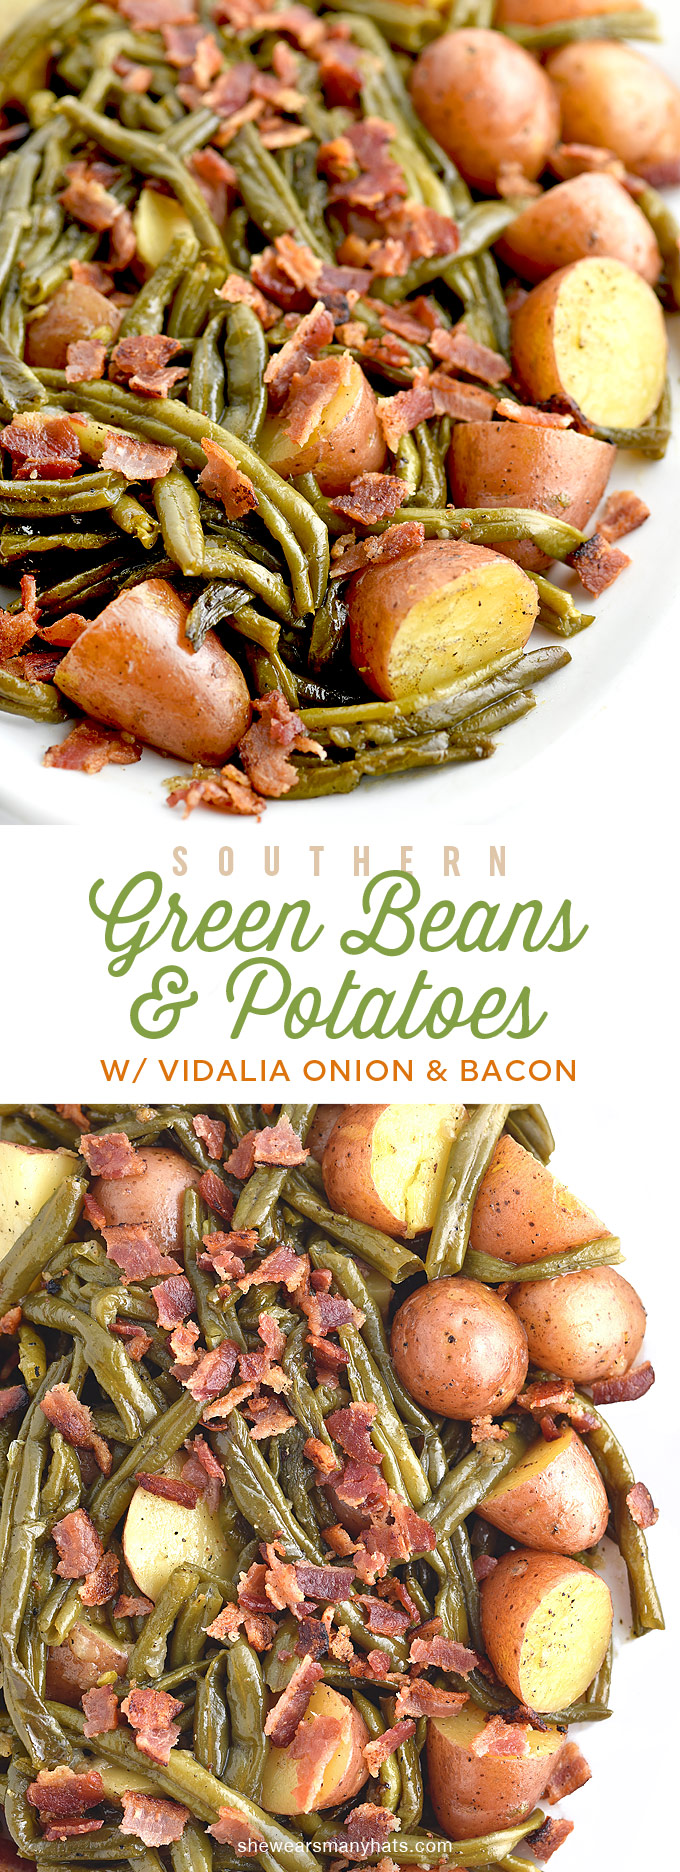 Southern Green Beans and Potatoes with Vidalia Onion and Bacon Recipe ...